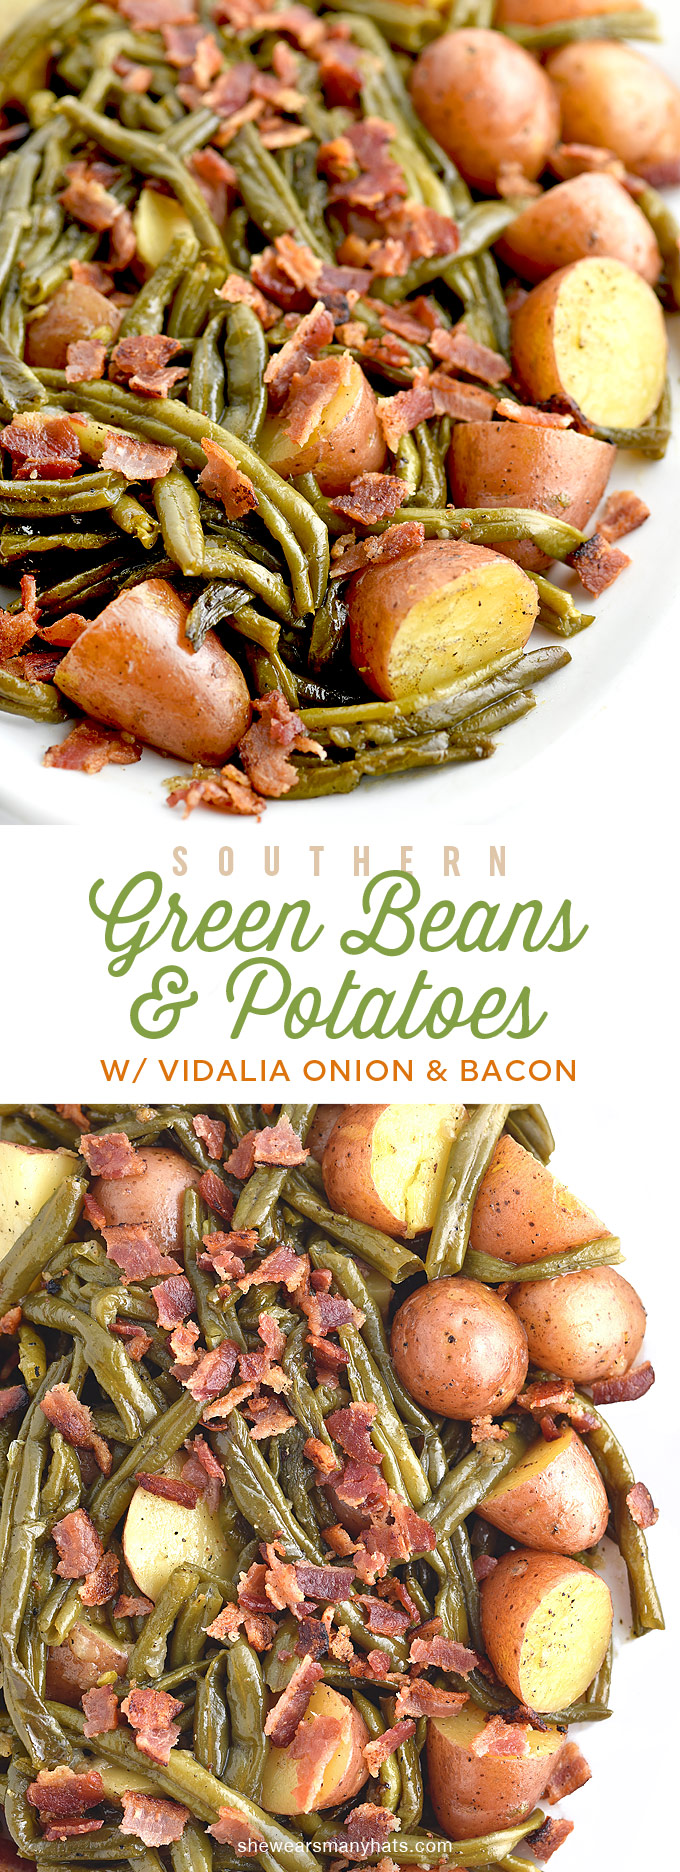 Southern Green Beans and Potatoes with Vidalia Onion and Bacon Recipe ...